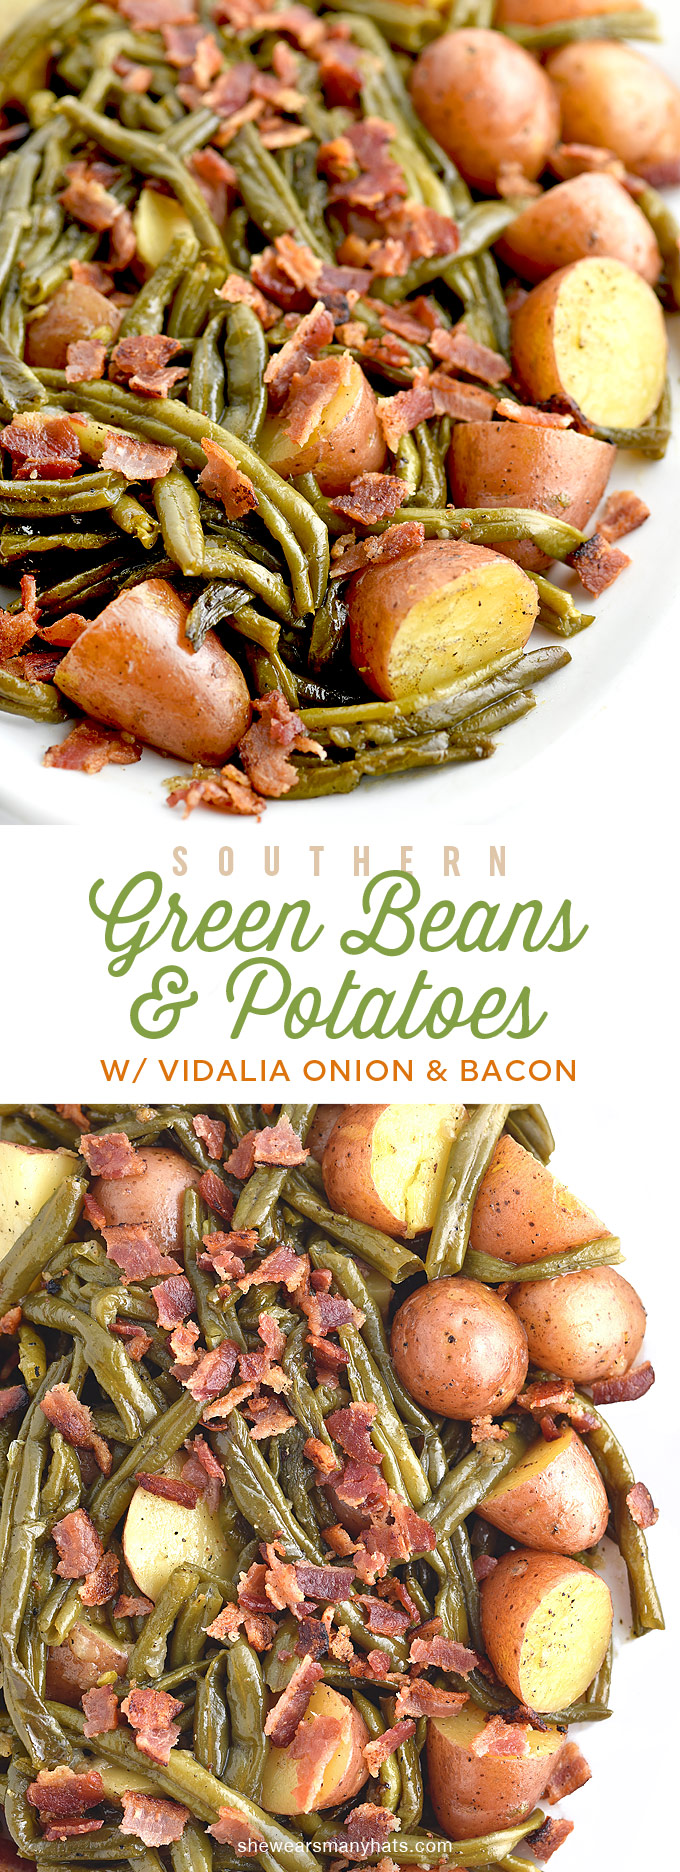 Southern Green Beans and Potatoes with Vidalia Onion and Bacon Recipe ...